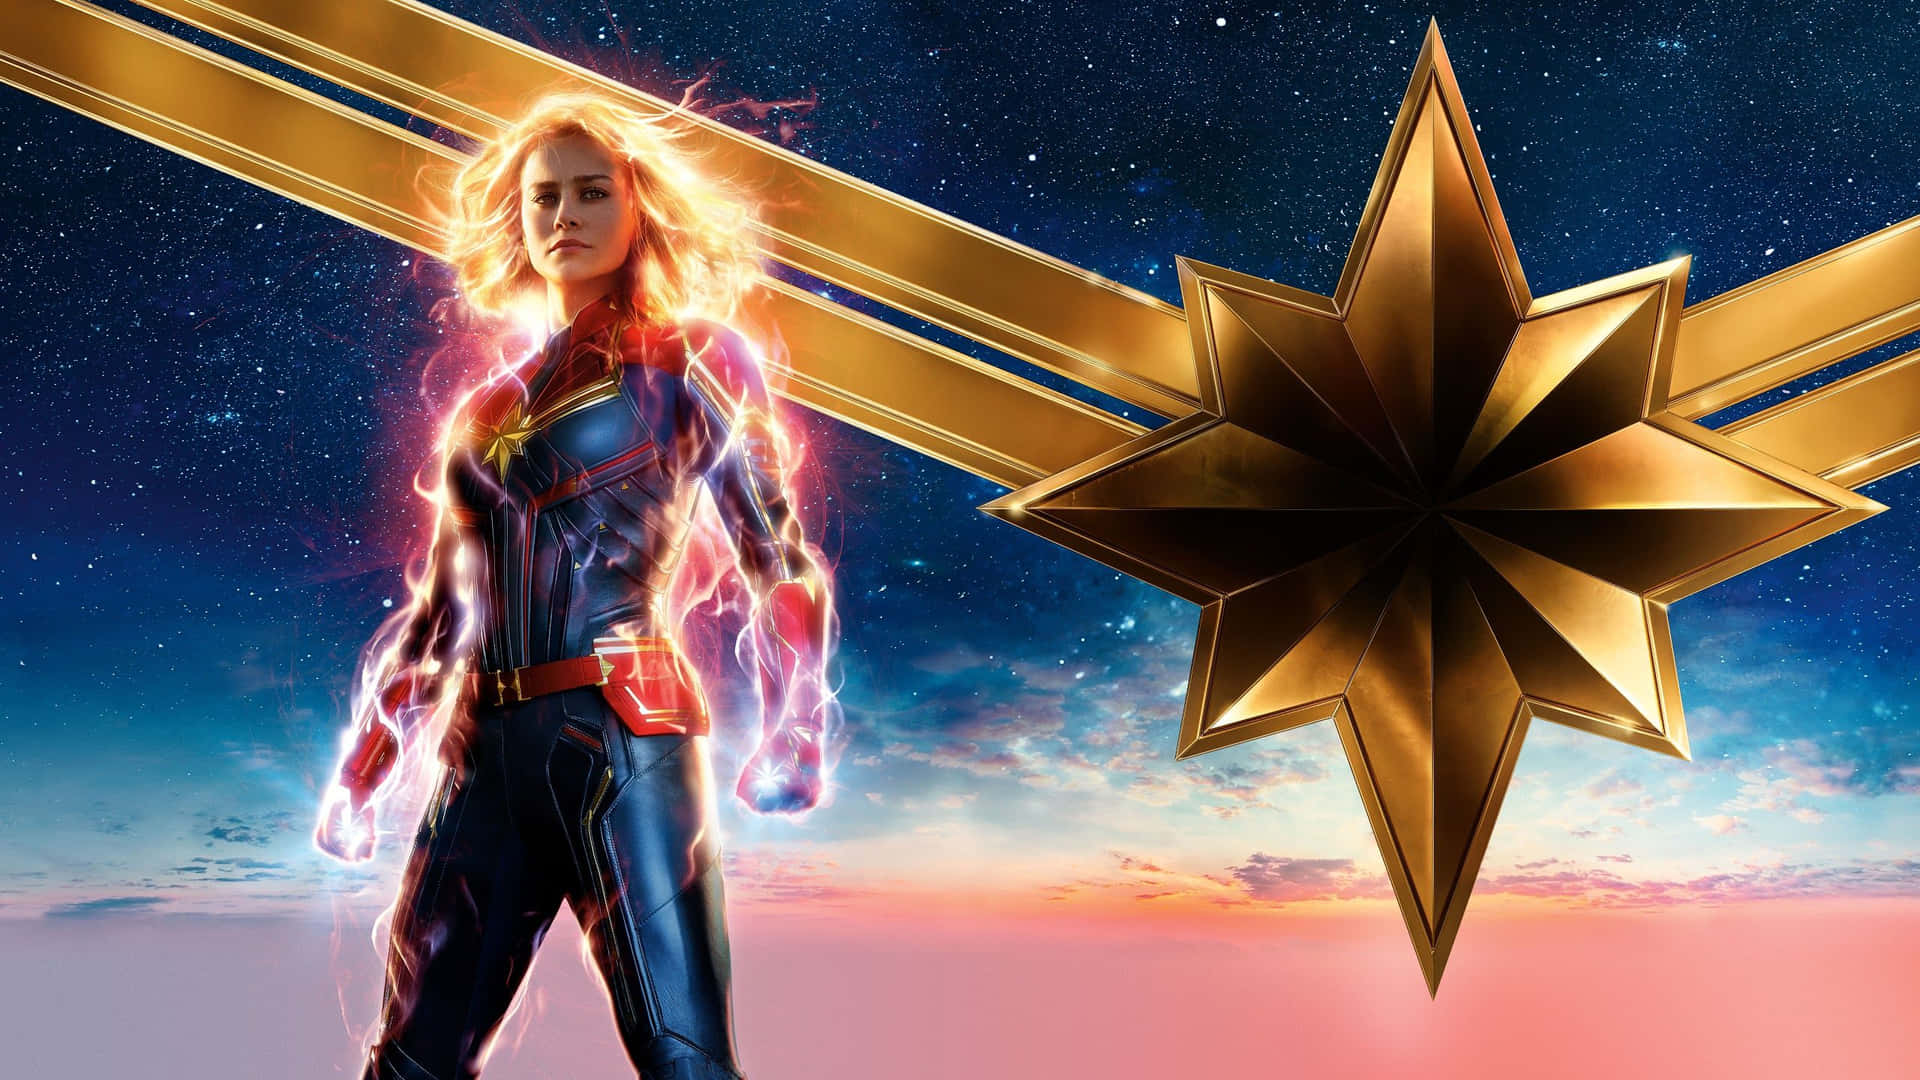 Unlock new levels with the limited edition Captain Marvel iPad Wallpaper